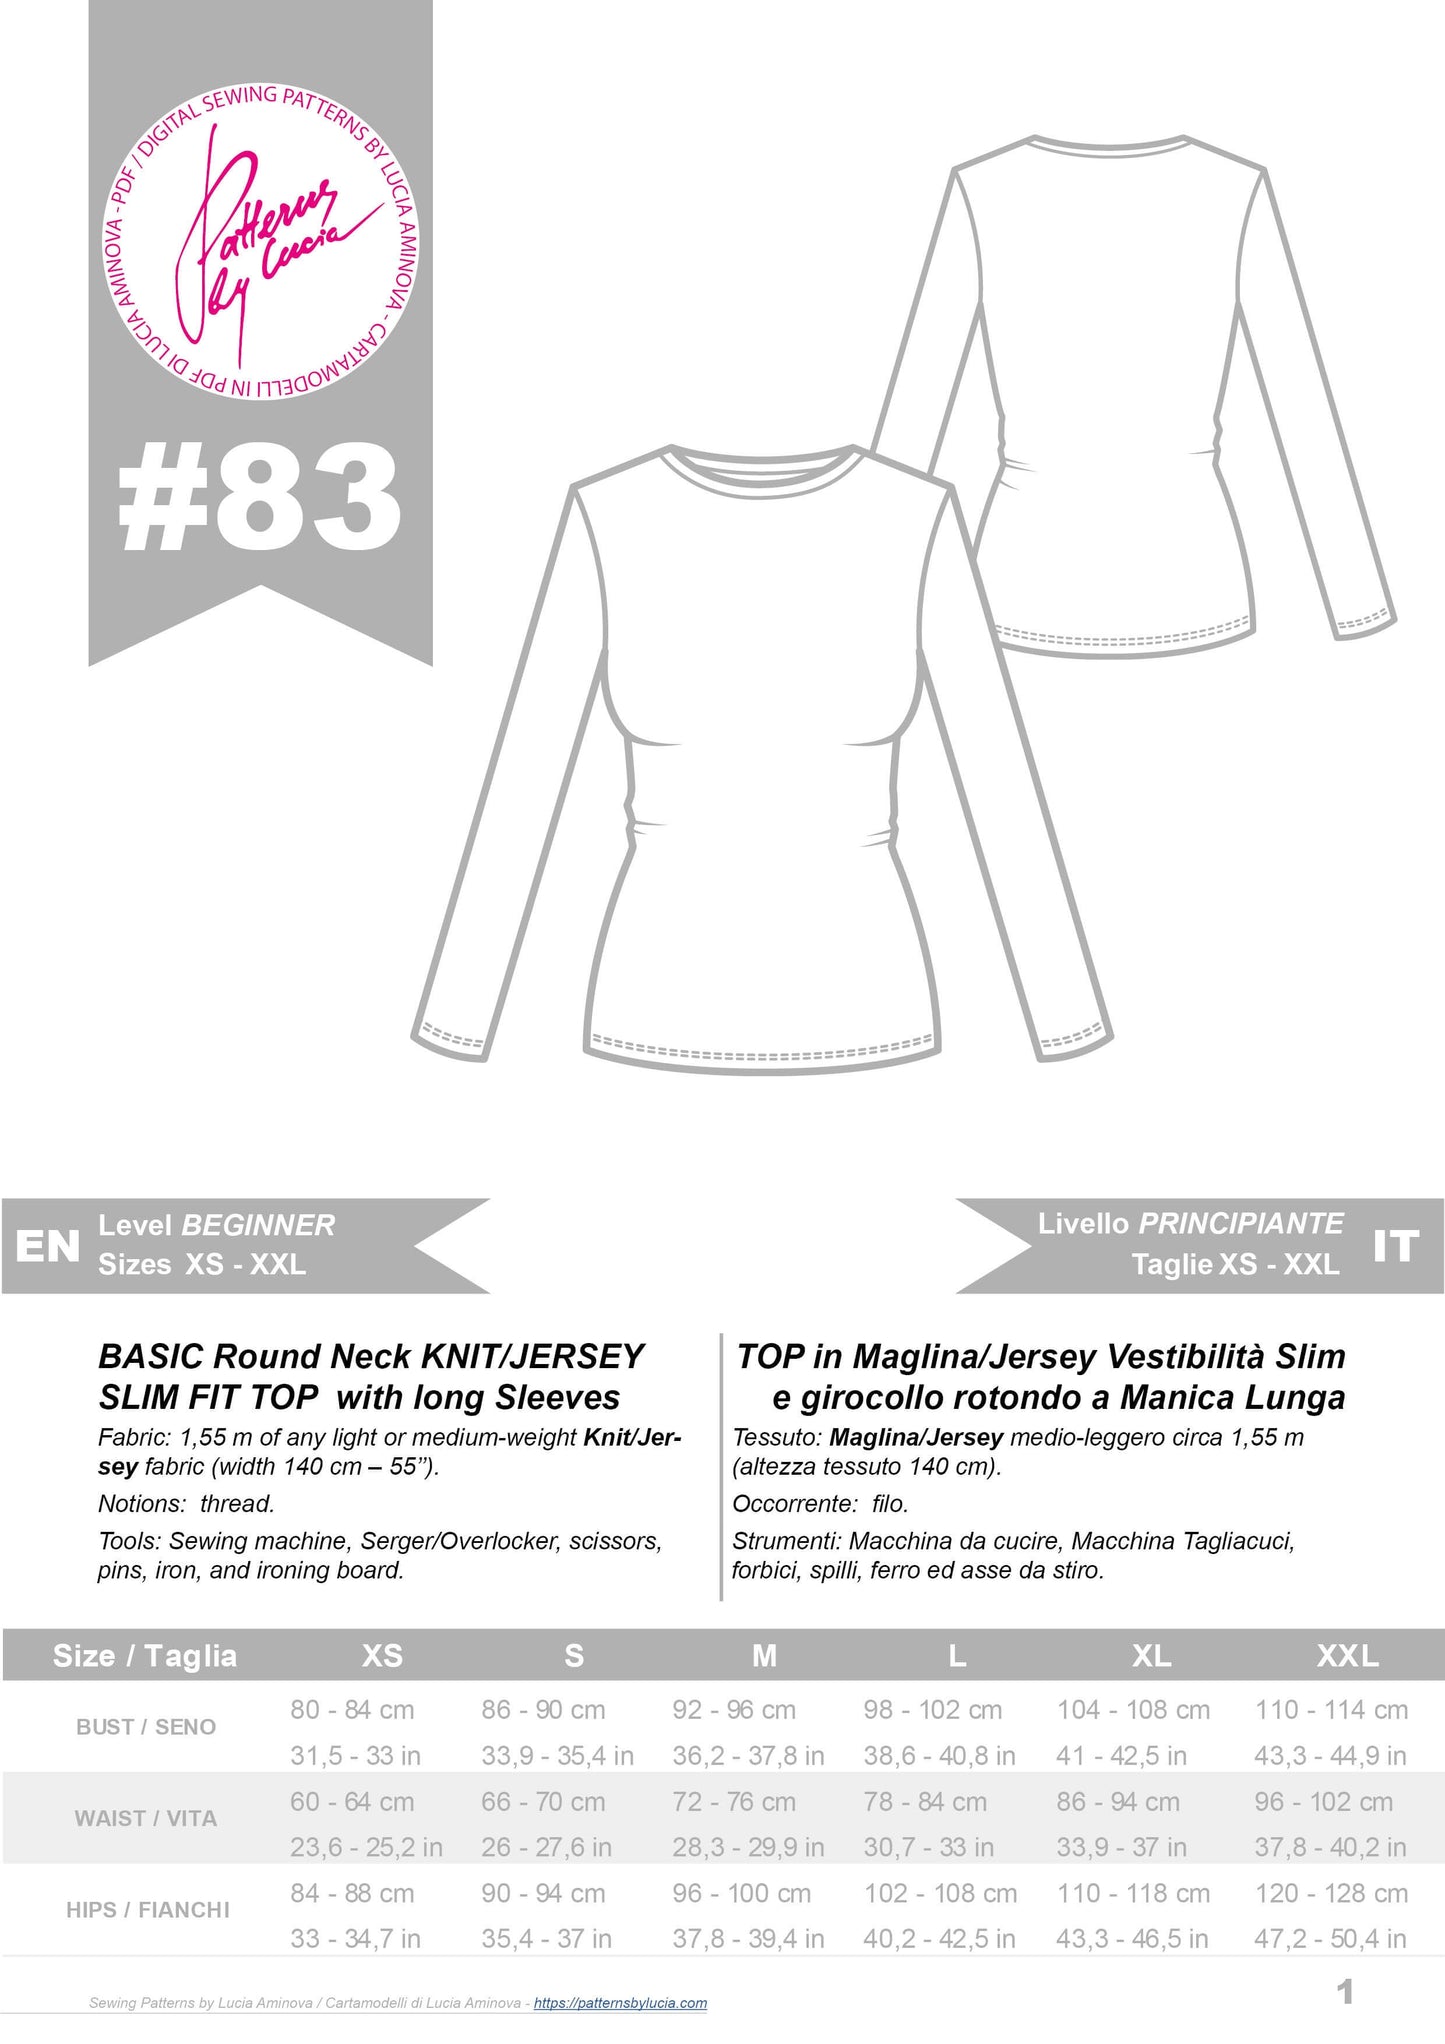 Stretchy Jersey Top, Sewing Pattern N.83